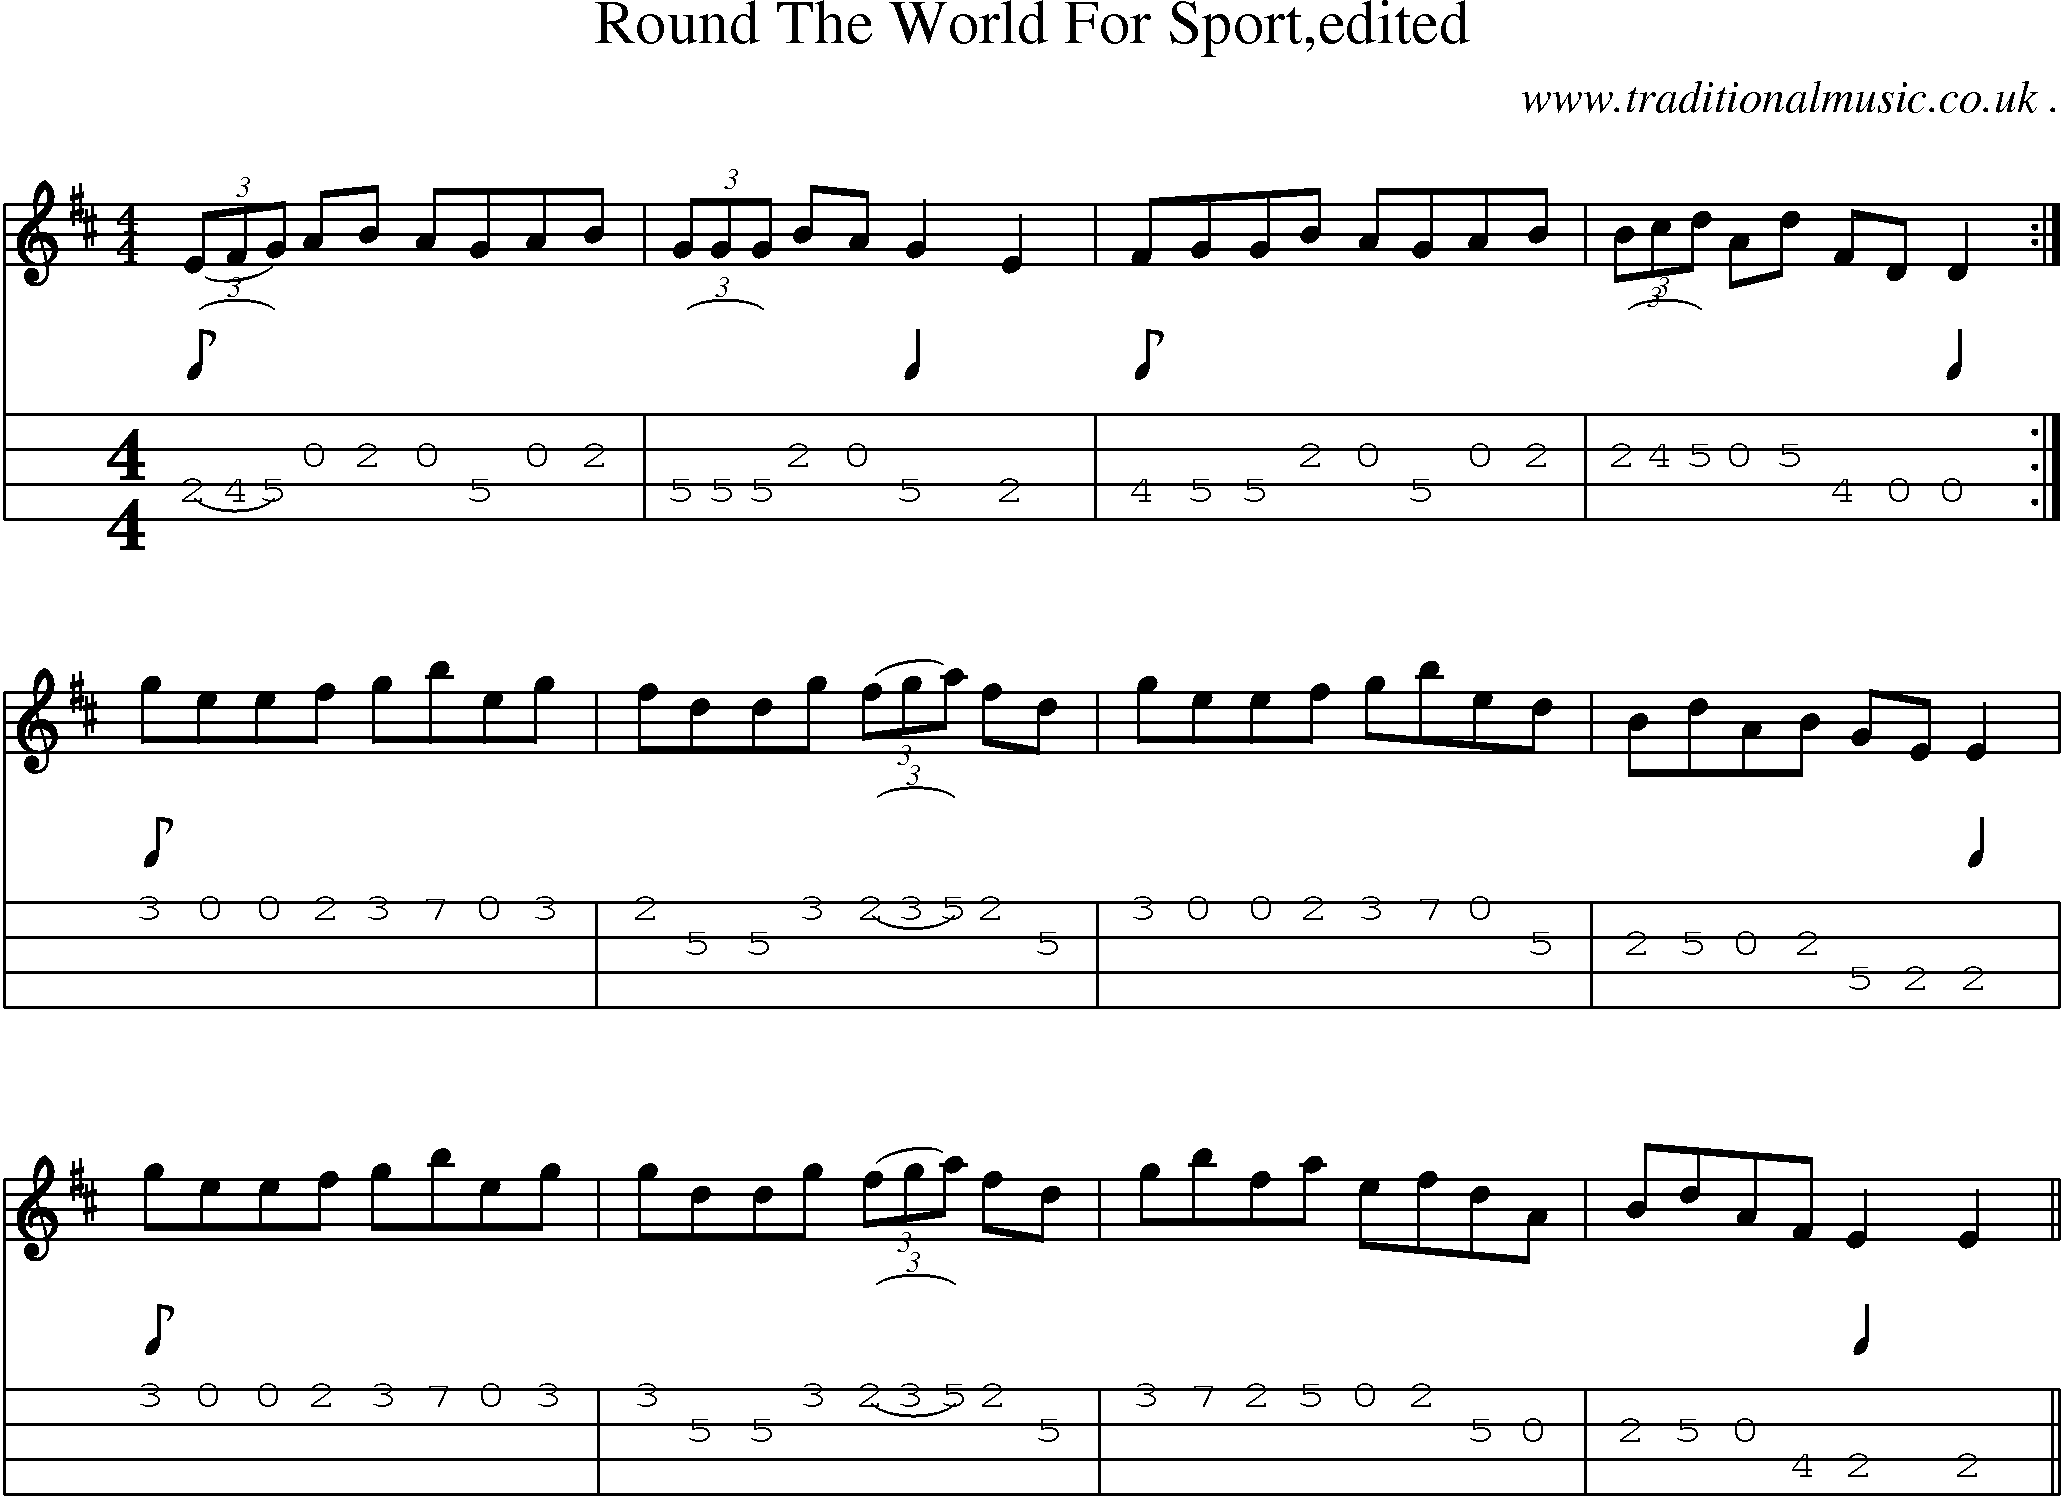 Sheet-Music and Mandolin Tabs for Round The World For Sportedited